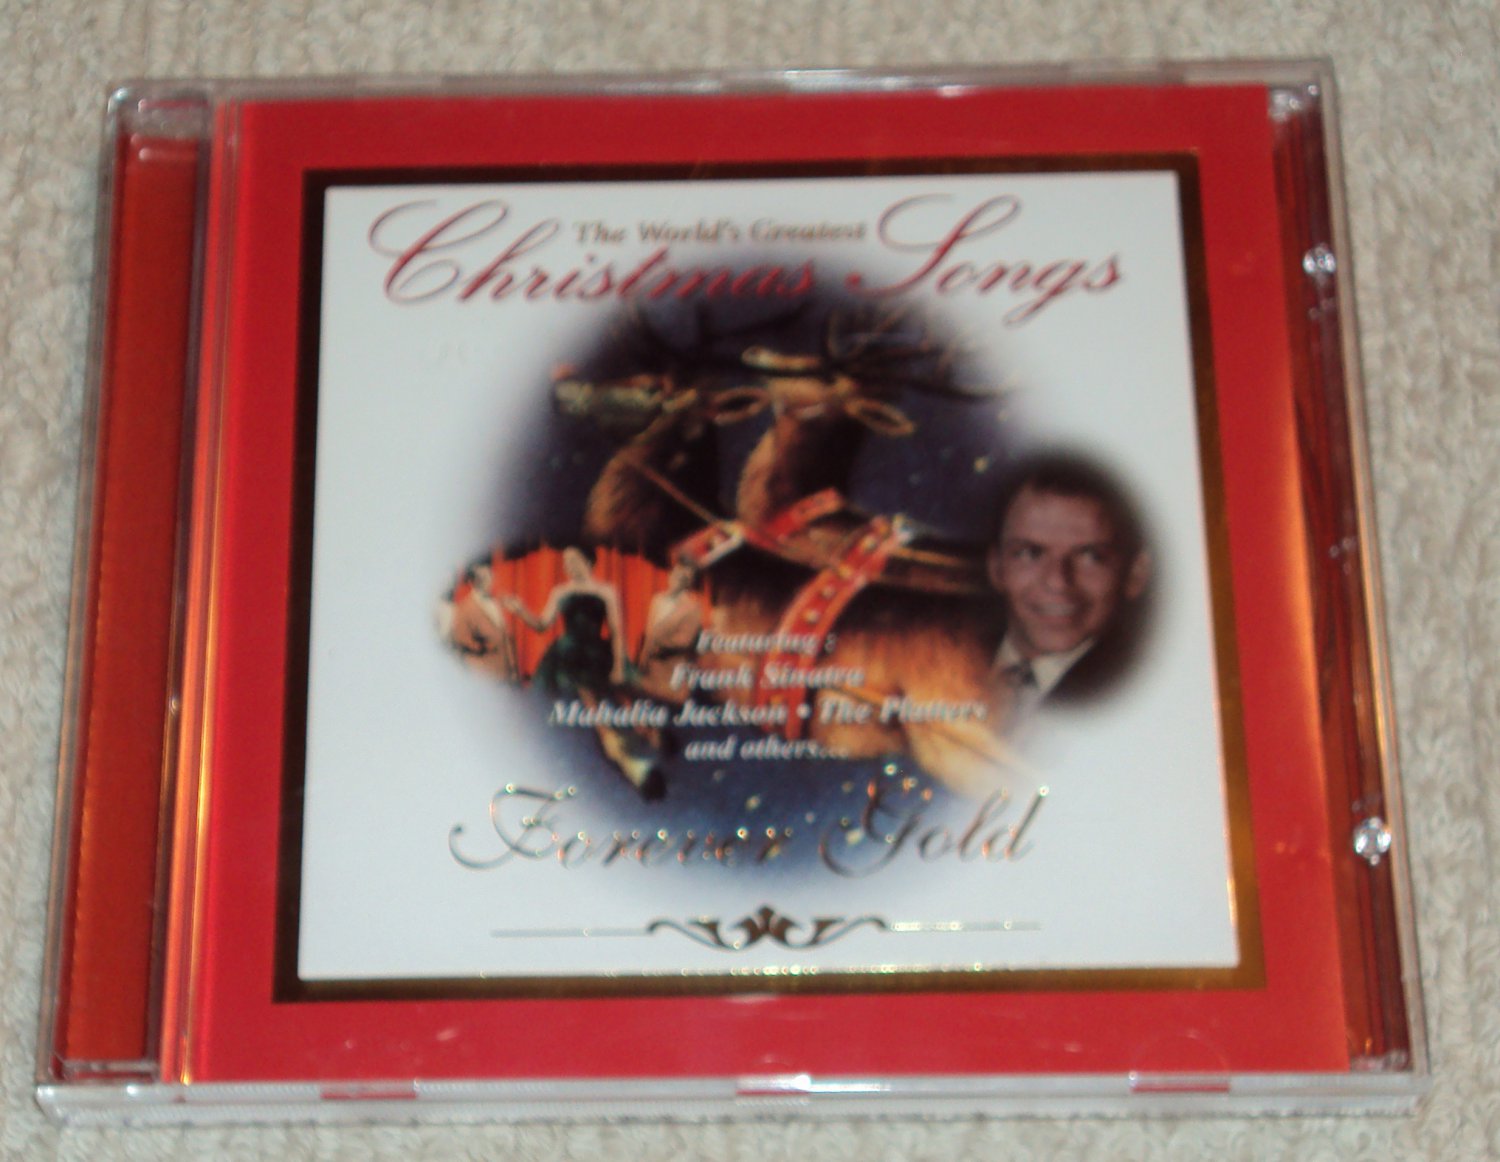 The World's Greatest Christmas Songs Forever Gold CD Crosby, Sinatra, Platters, Mantovani...